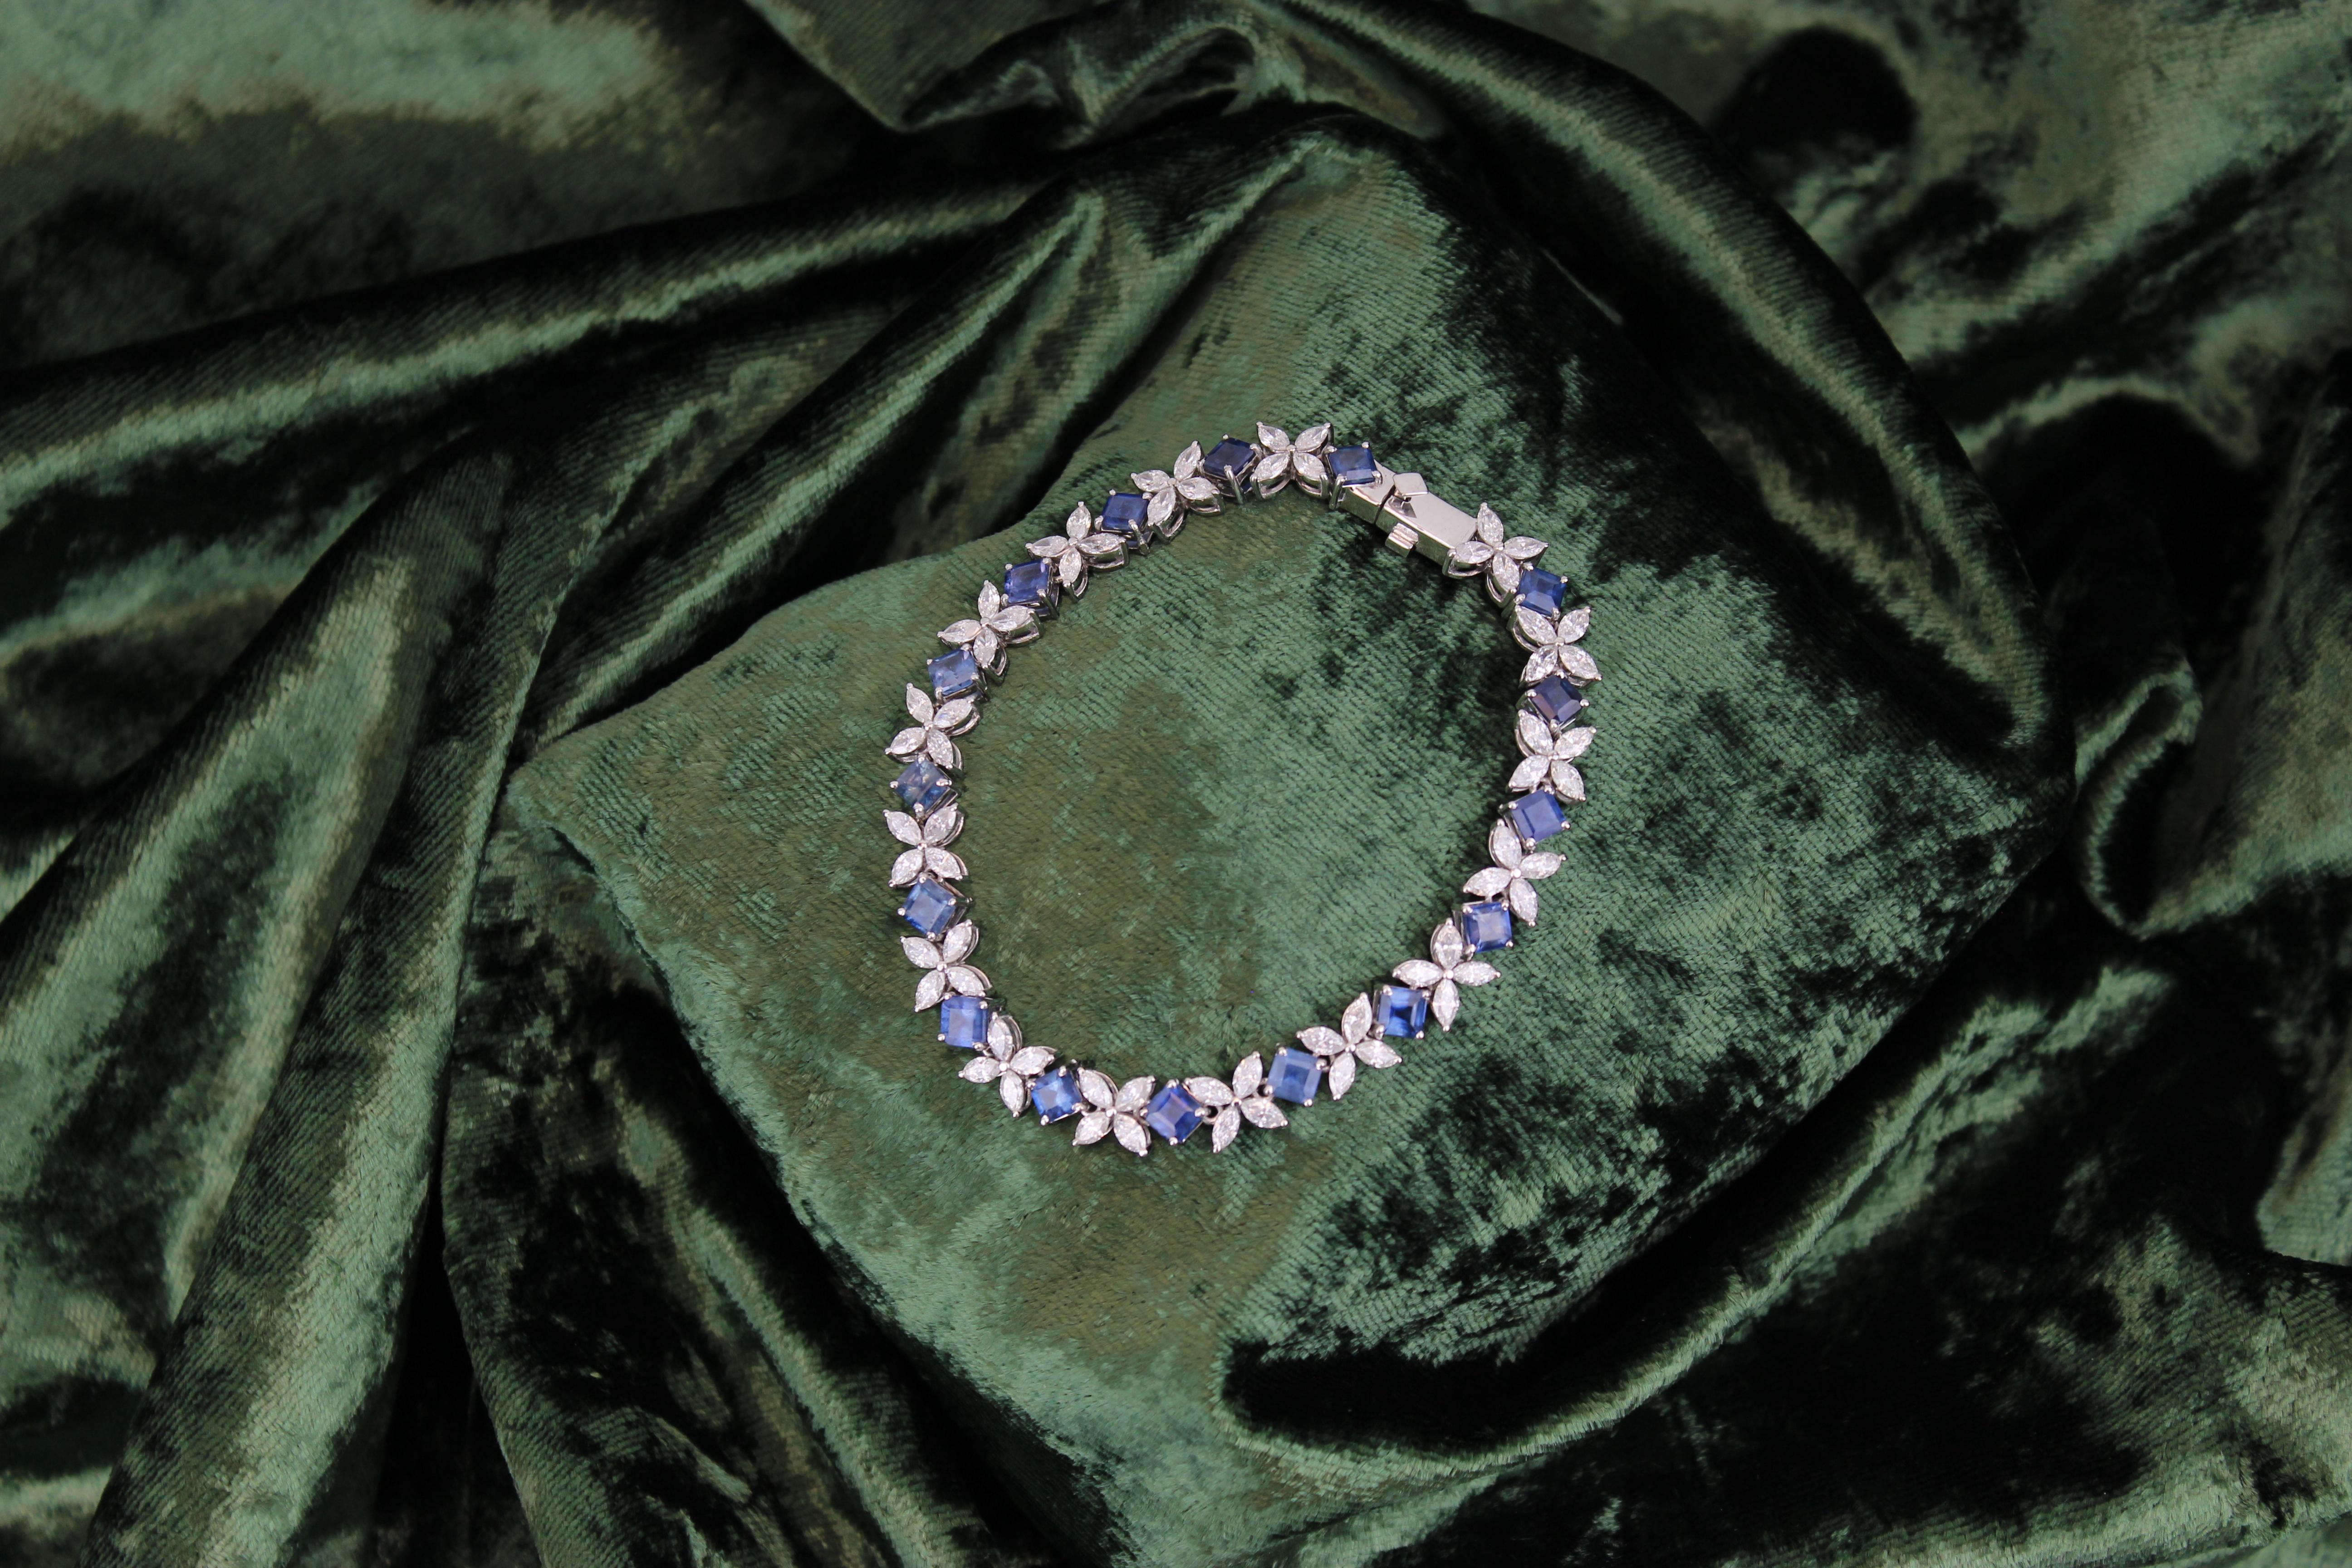 The floral design Marquise Diamond Tennis Bracelet with Natural Princess Cut Blue Sapphire is an exquisite piece of jewelry crafted in 18k solid gold. It features a combination of marquise-cut diamonds and princess-cut sapphires arranged in a floral